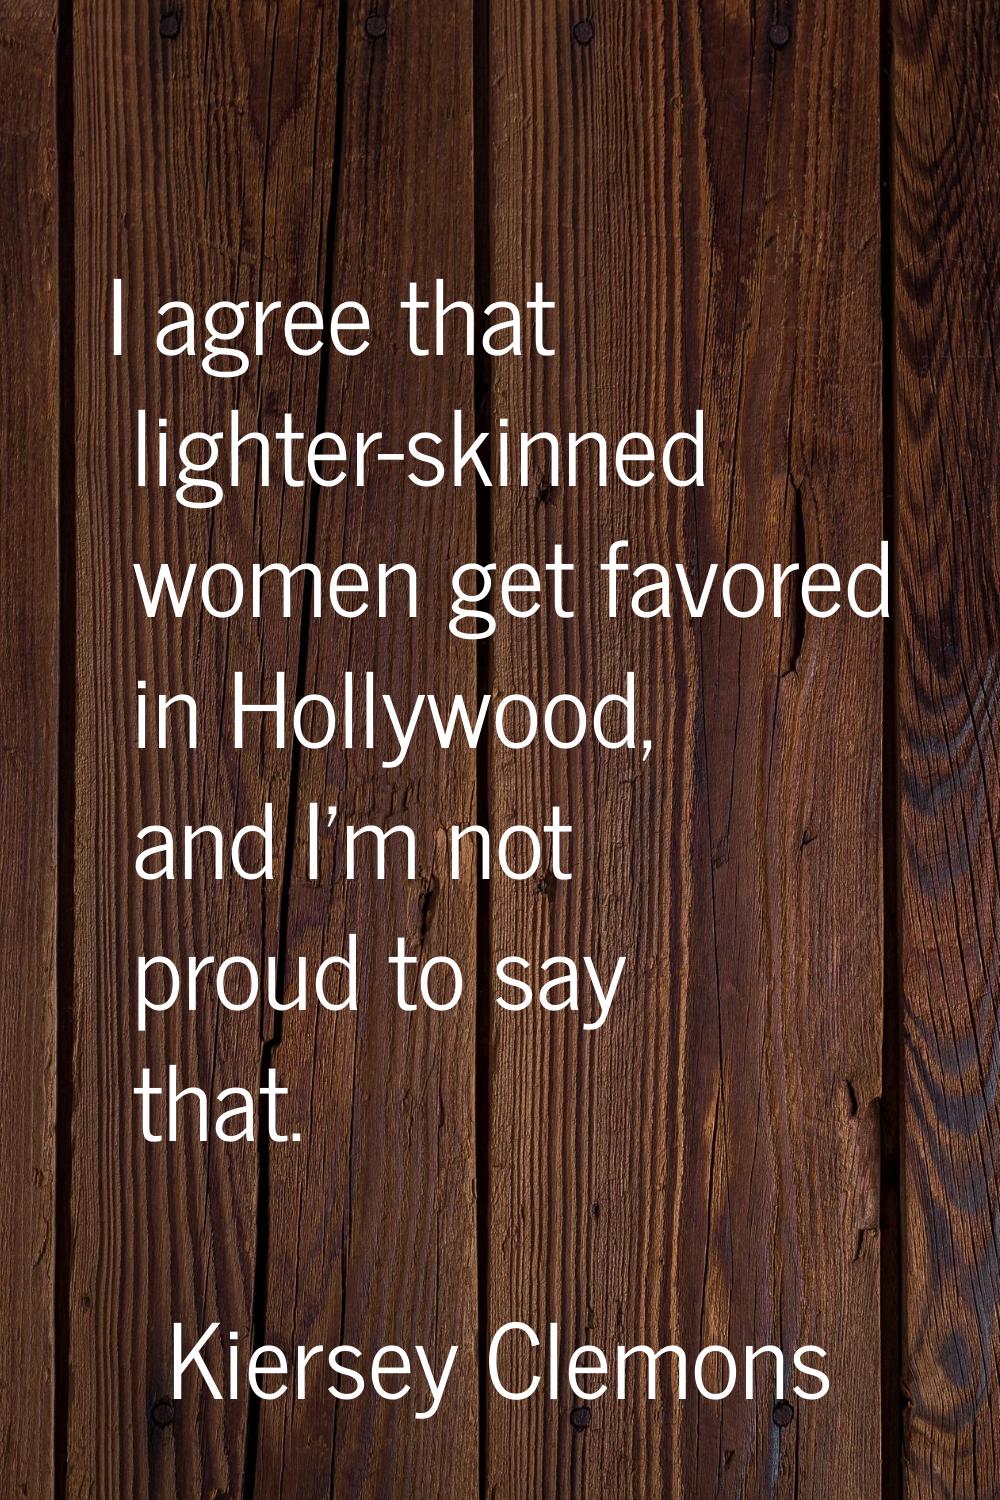 I agree that lighter-skinned women get favored in Hollywood, and I'm not proud to say that.